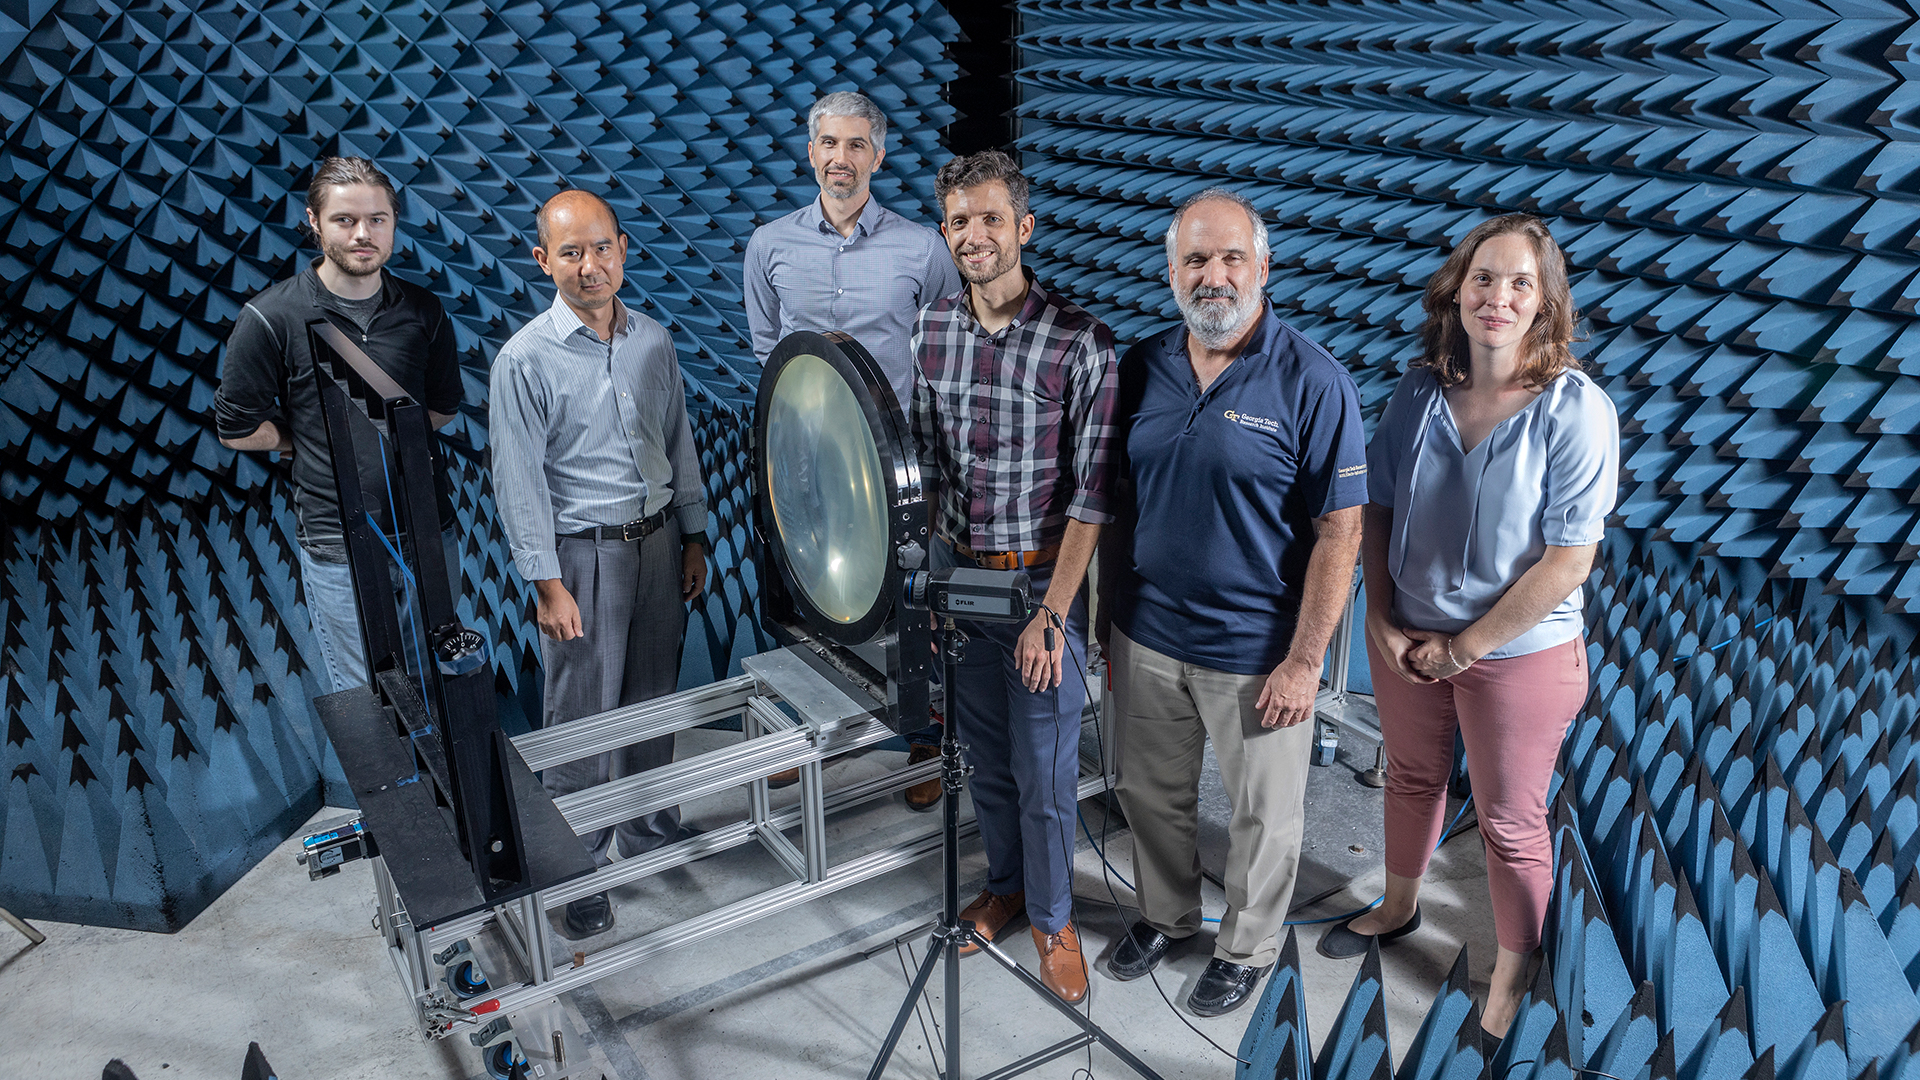 Five male and one female researcher stand in a group behind the testing device inside the dark blue anechoic chamber.